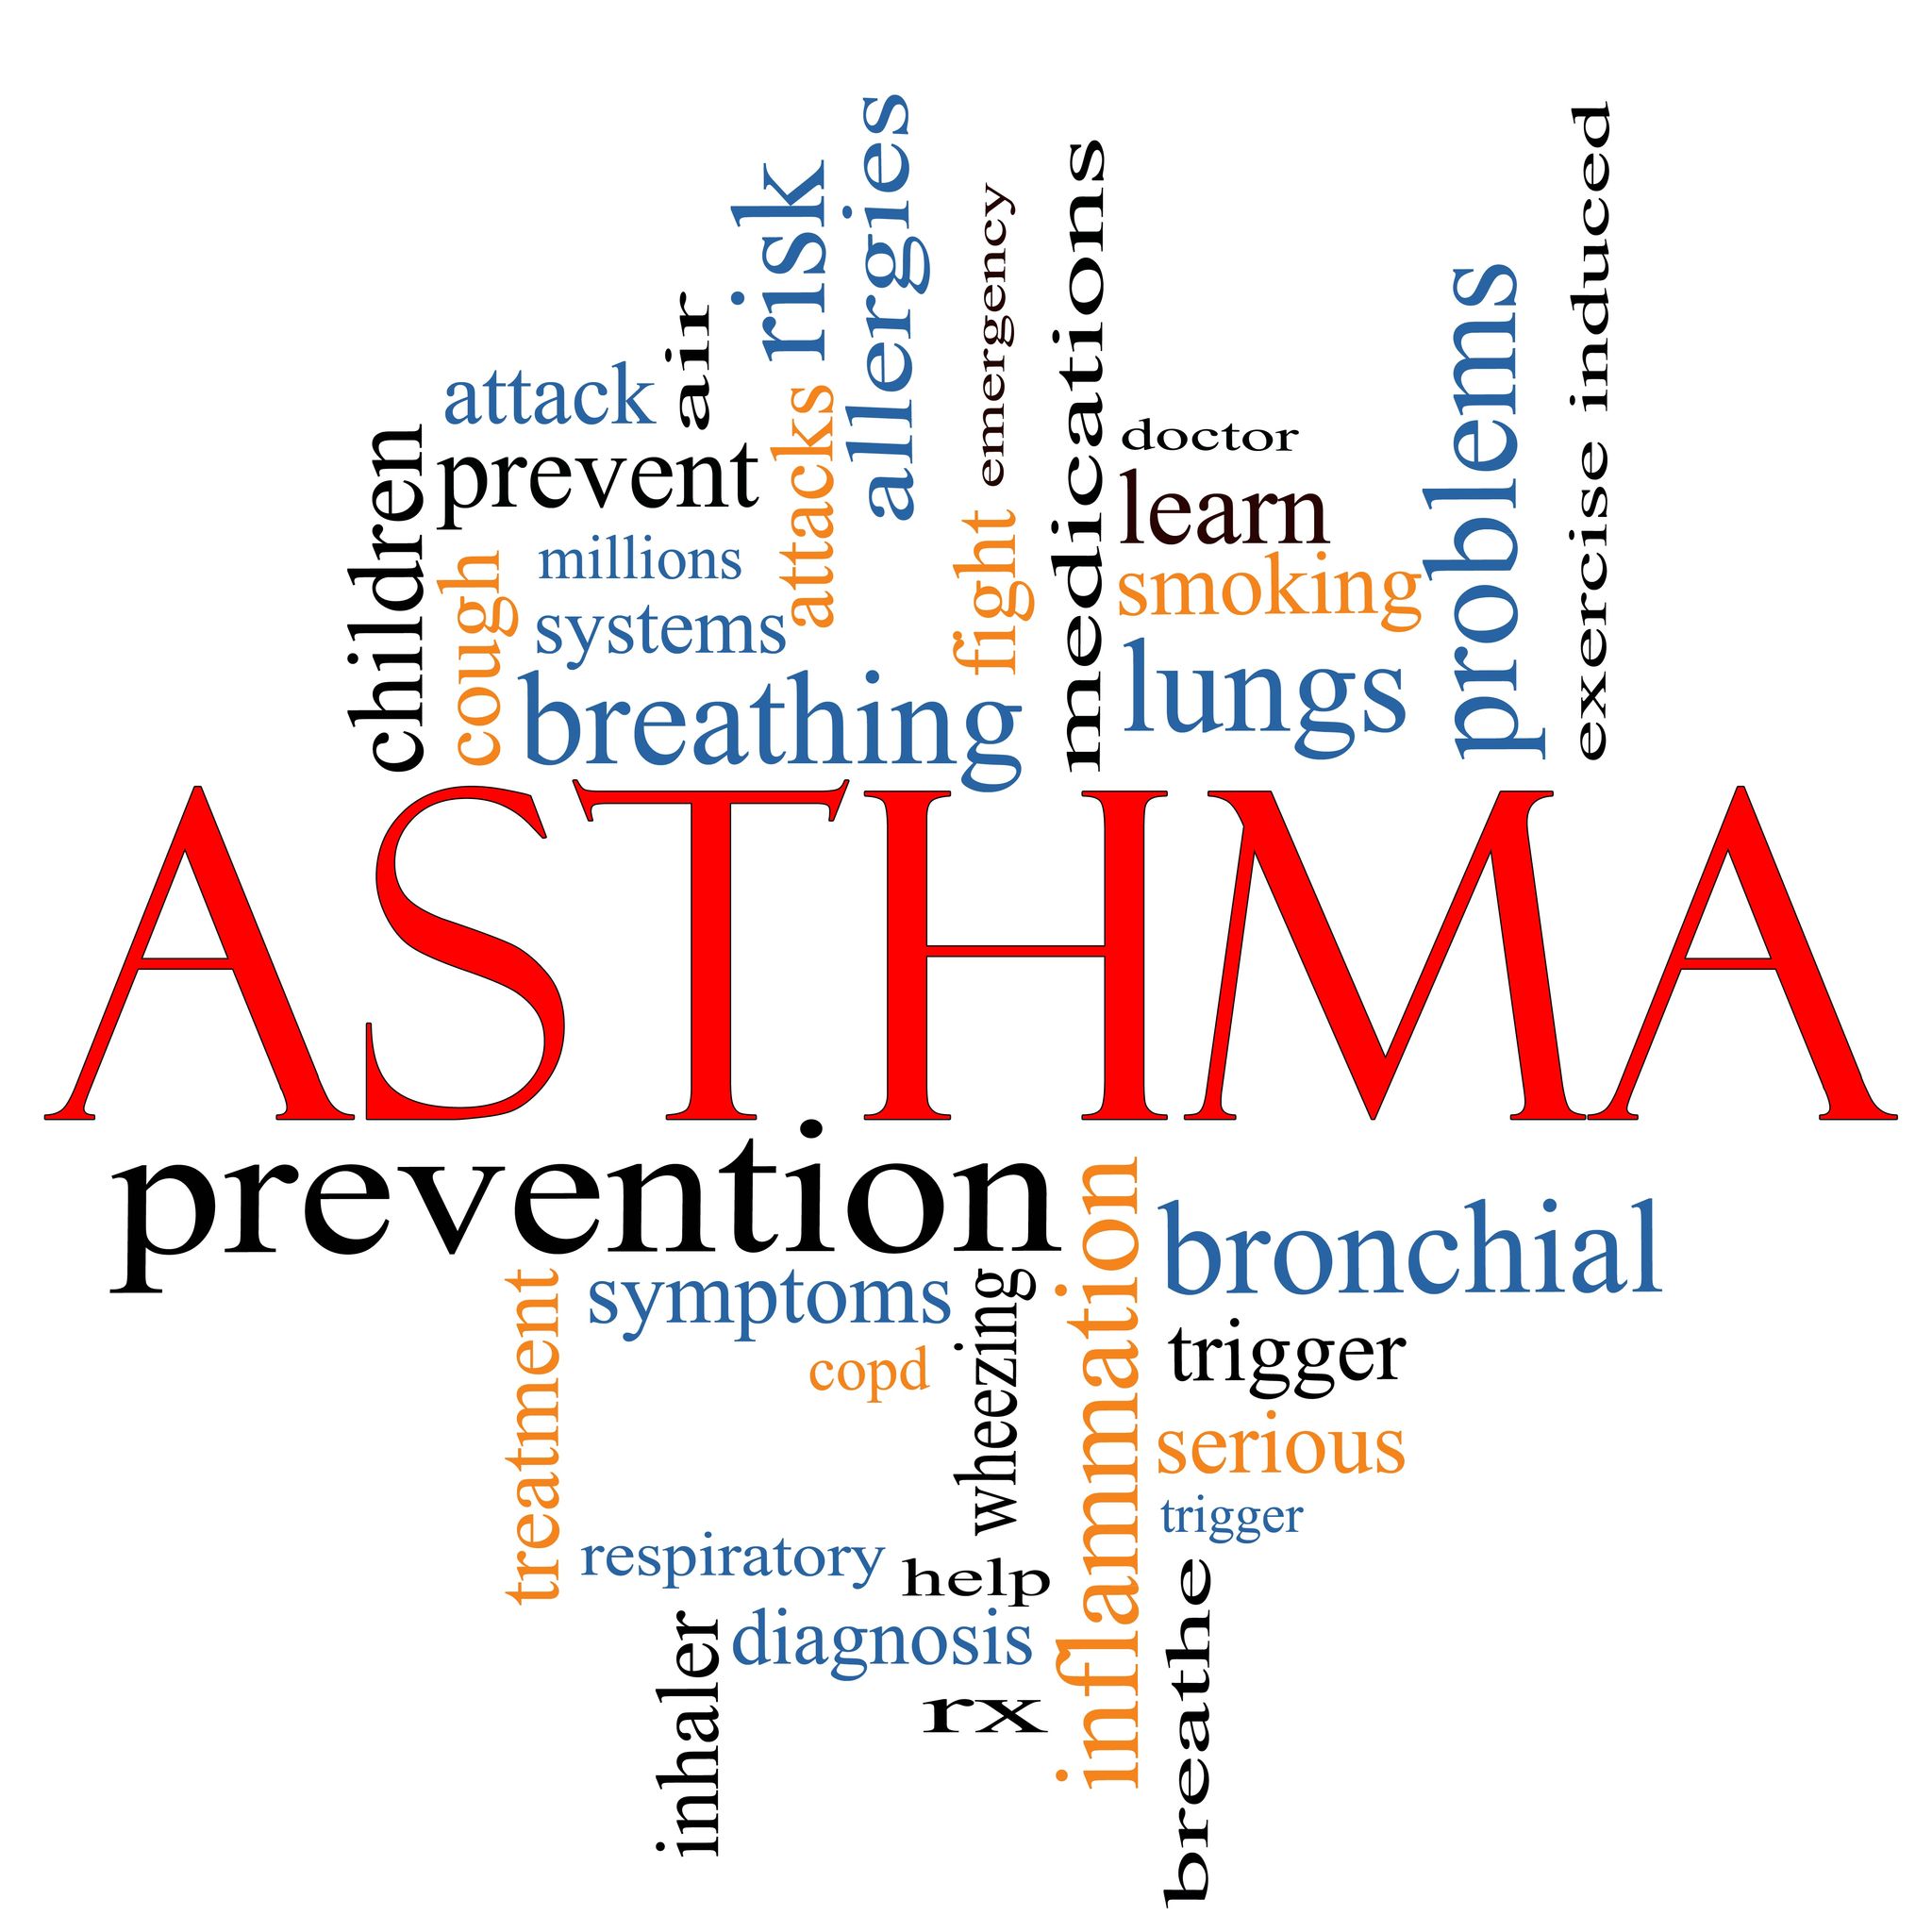 Easy-to-Learn Therapy May Help Asthmatics